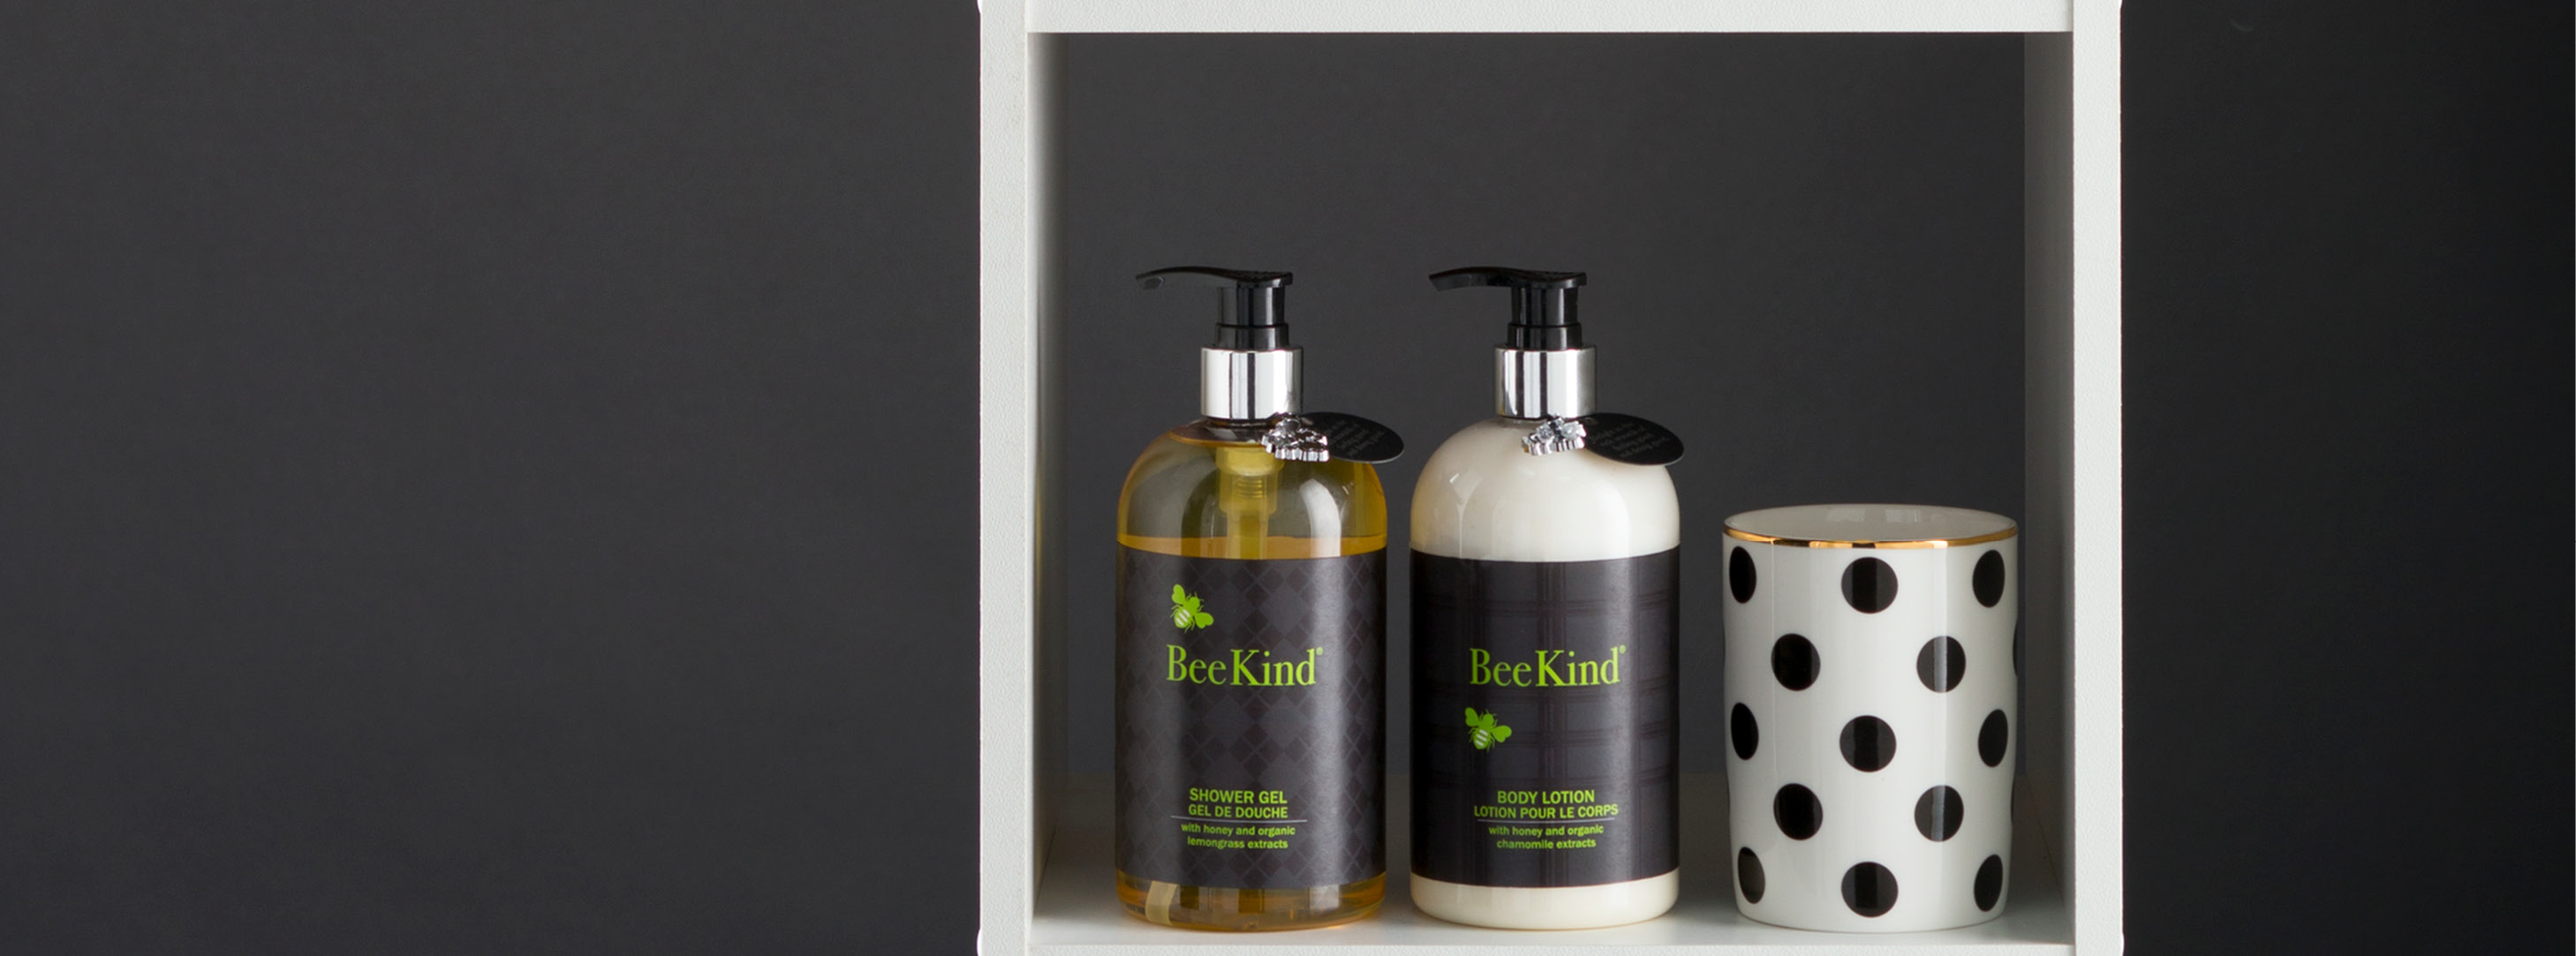 Personal Care Amenities